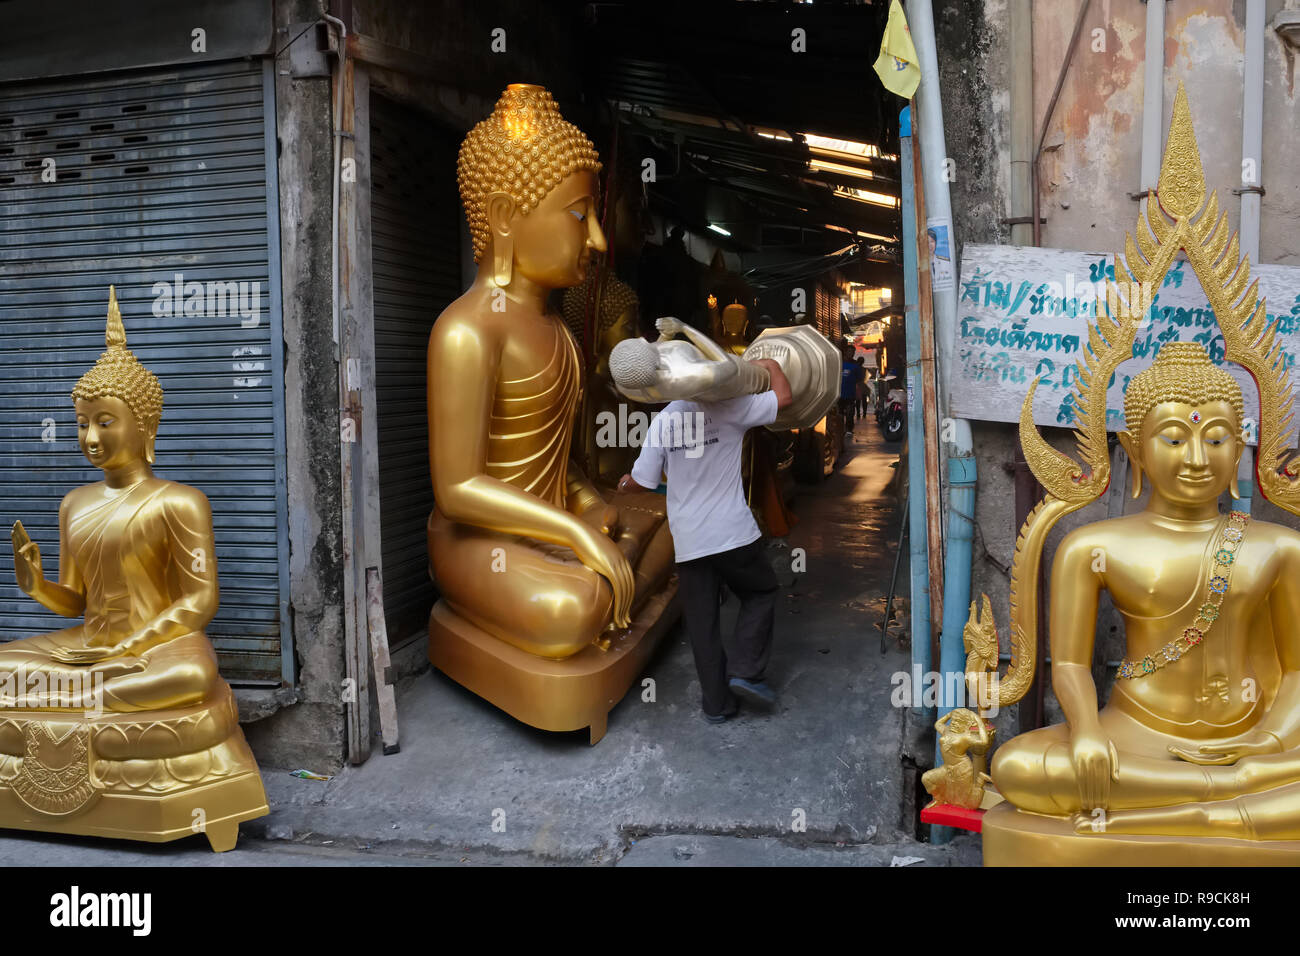 In a factory for Buddha statues in Bamrung Muang Road, Bangkok, Thailand, an employee carries a half-finished statue, passing other Buddha statues Stock Photo